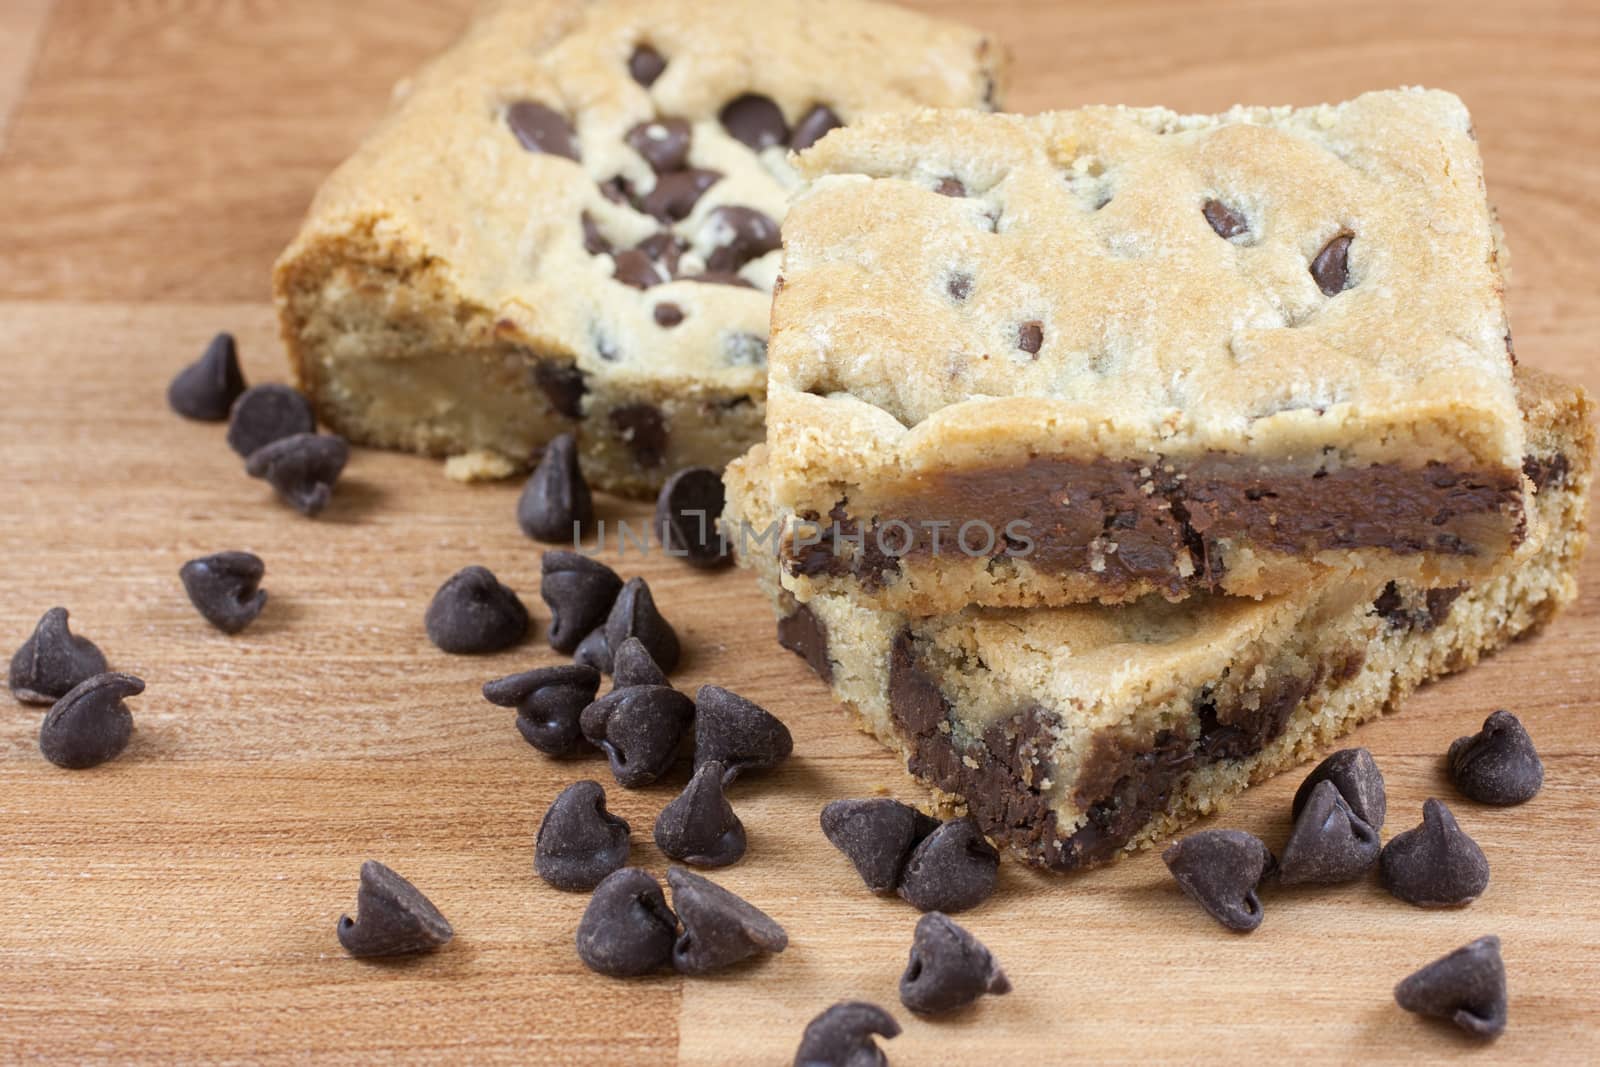 Chocolate chip cookie bars on a wooden surface with chocolate chips in the forground.